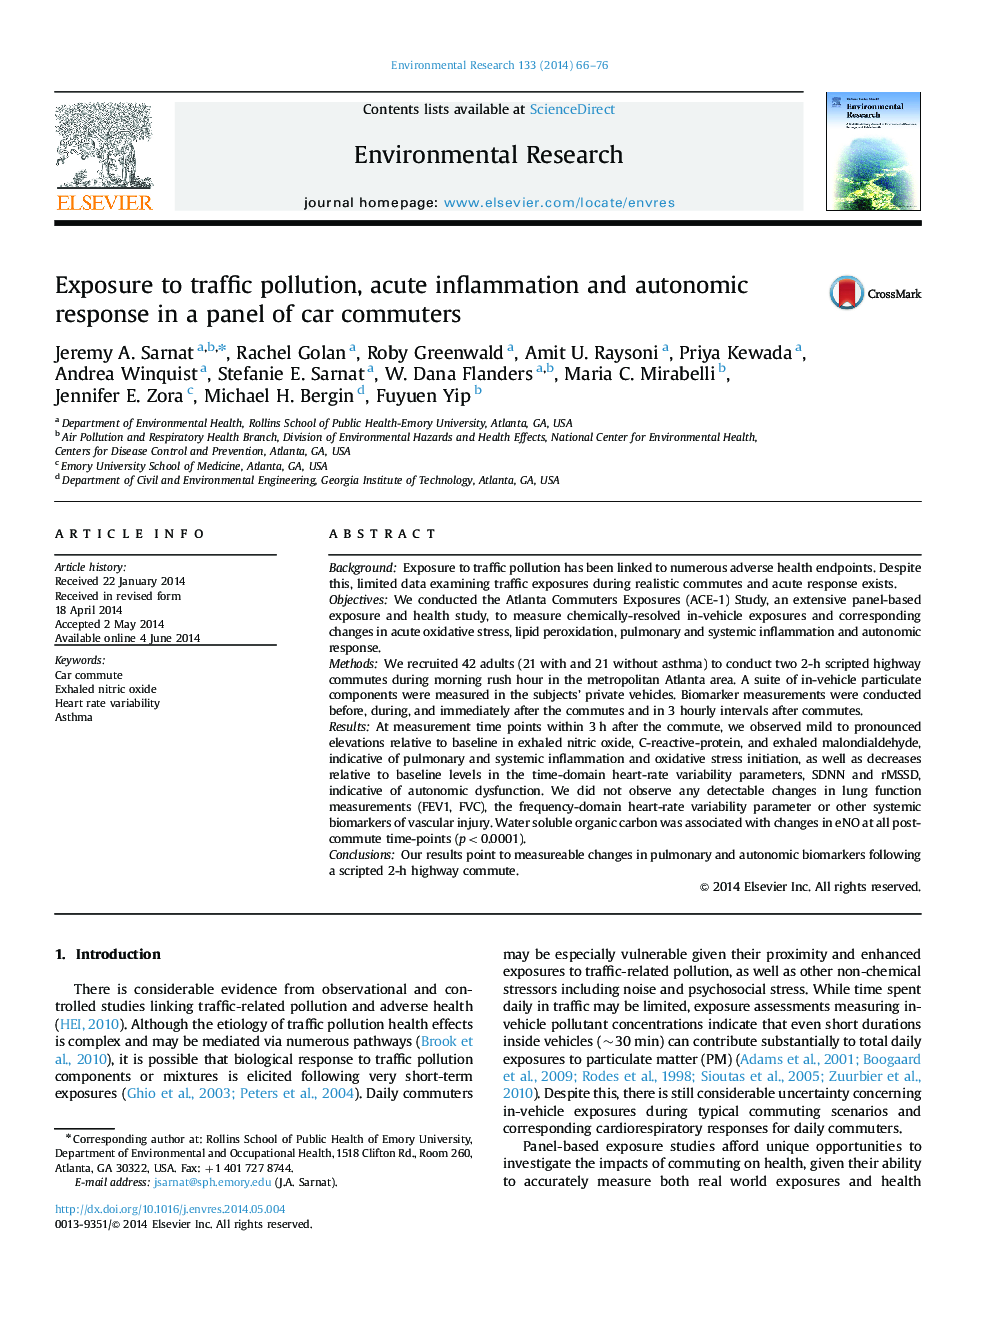 Exposure to traffic pollution, acute inflammation and autonomic response in a panel of car commuters